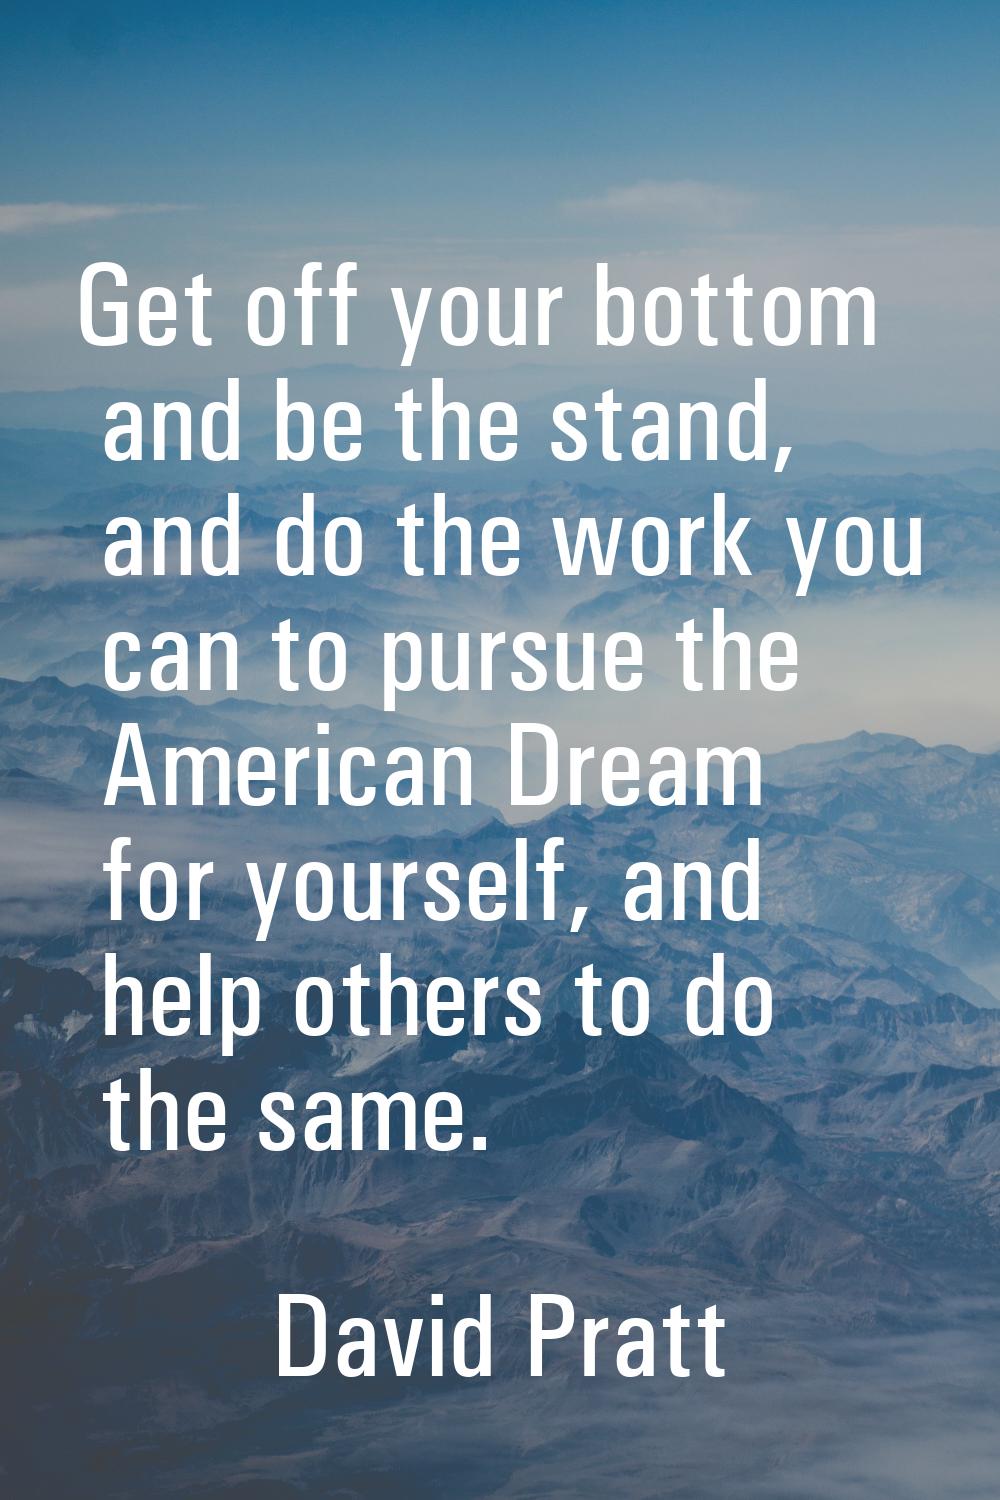 Get off your bottom and be the stand, and do the work you can to pursue the American Dream for your